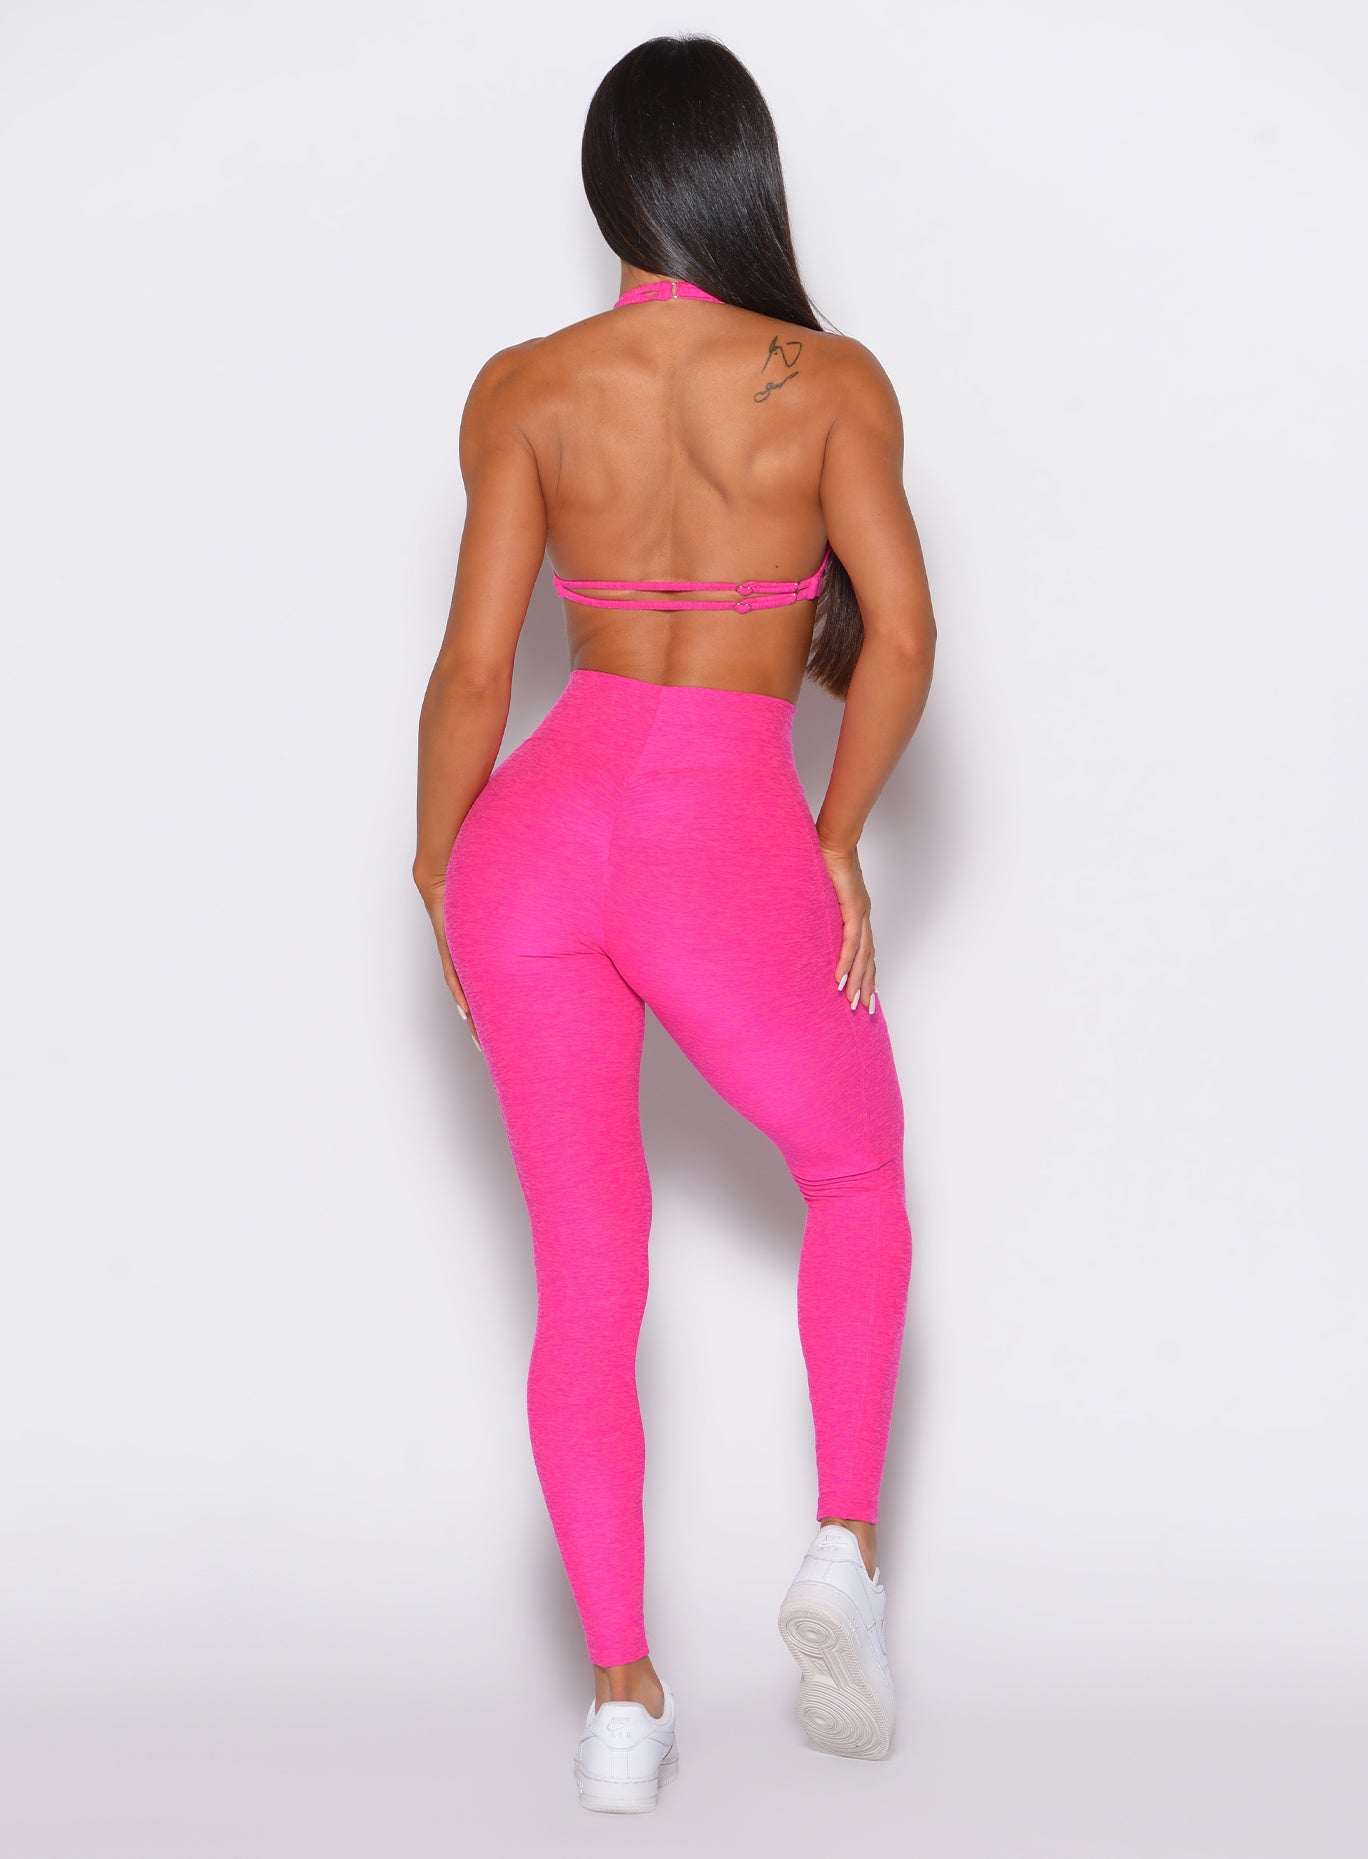 back  profile view of a model wearing our curves leggings in Neon Pink Berry color along with the matching bra